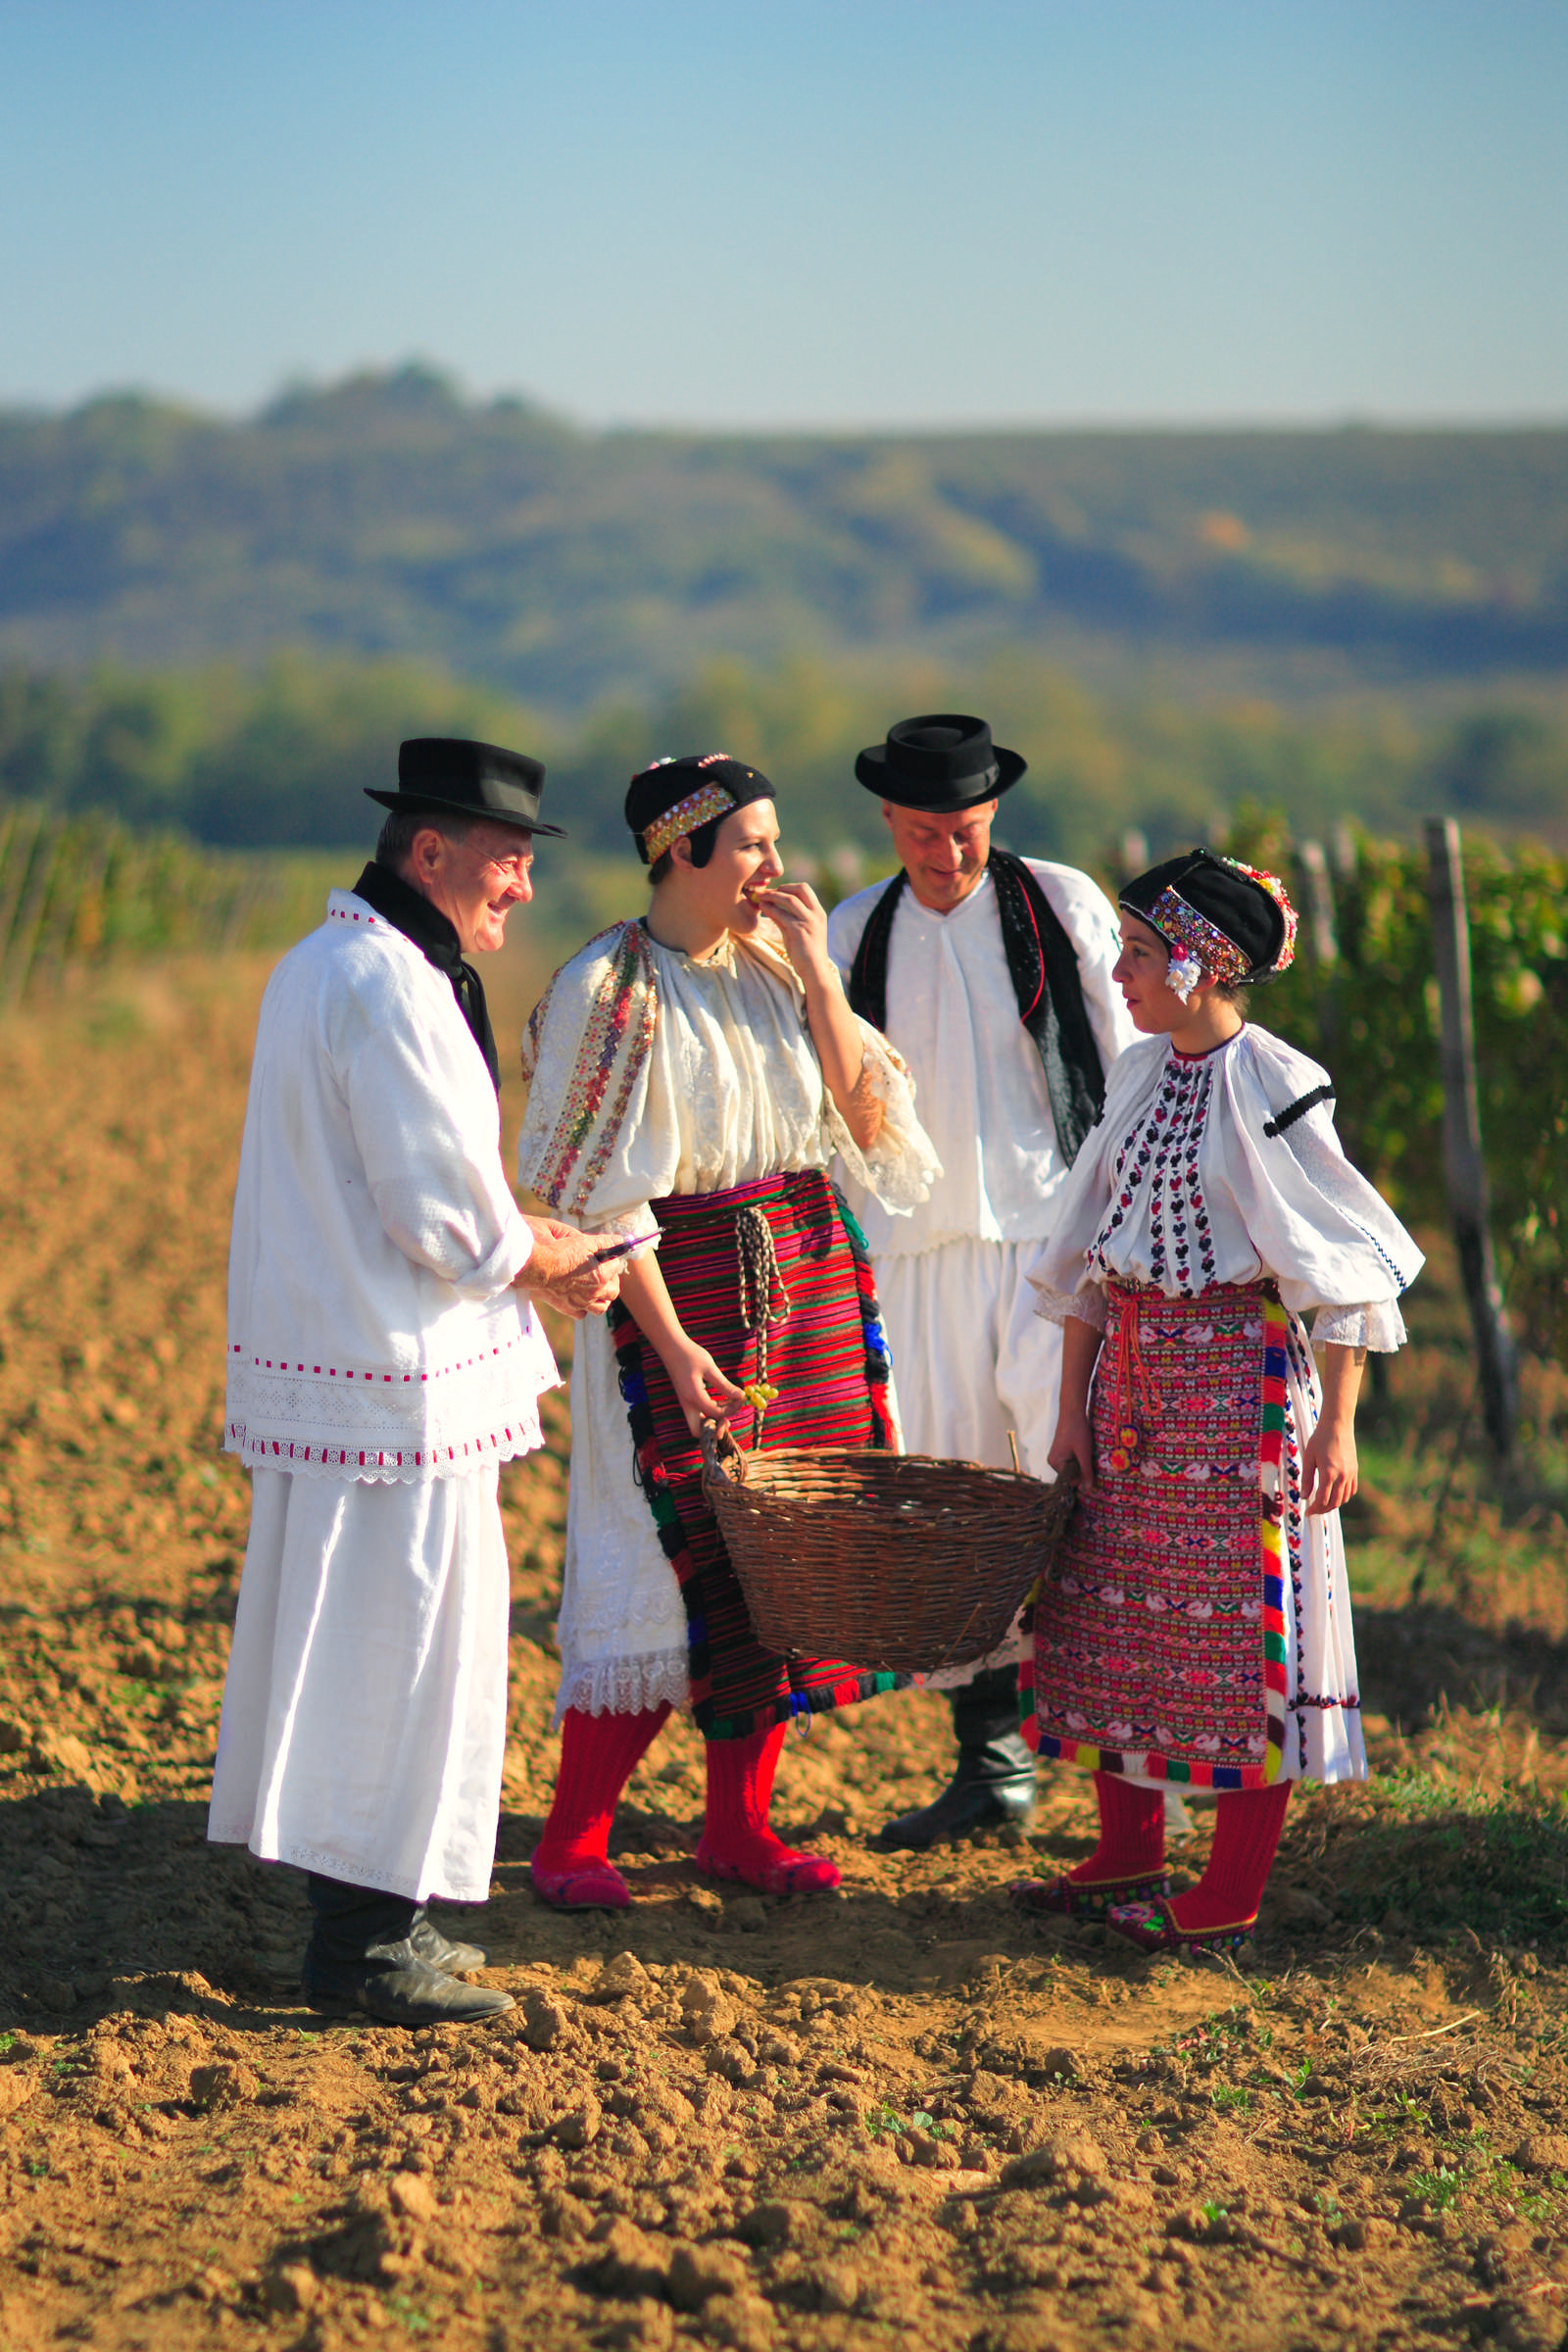 People in traditional slavonian outerwear working in vineyard